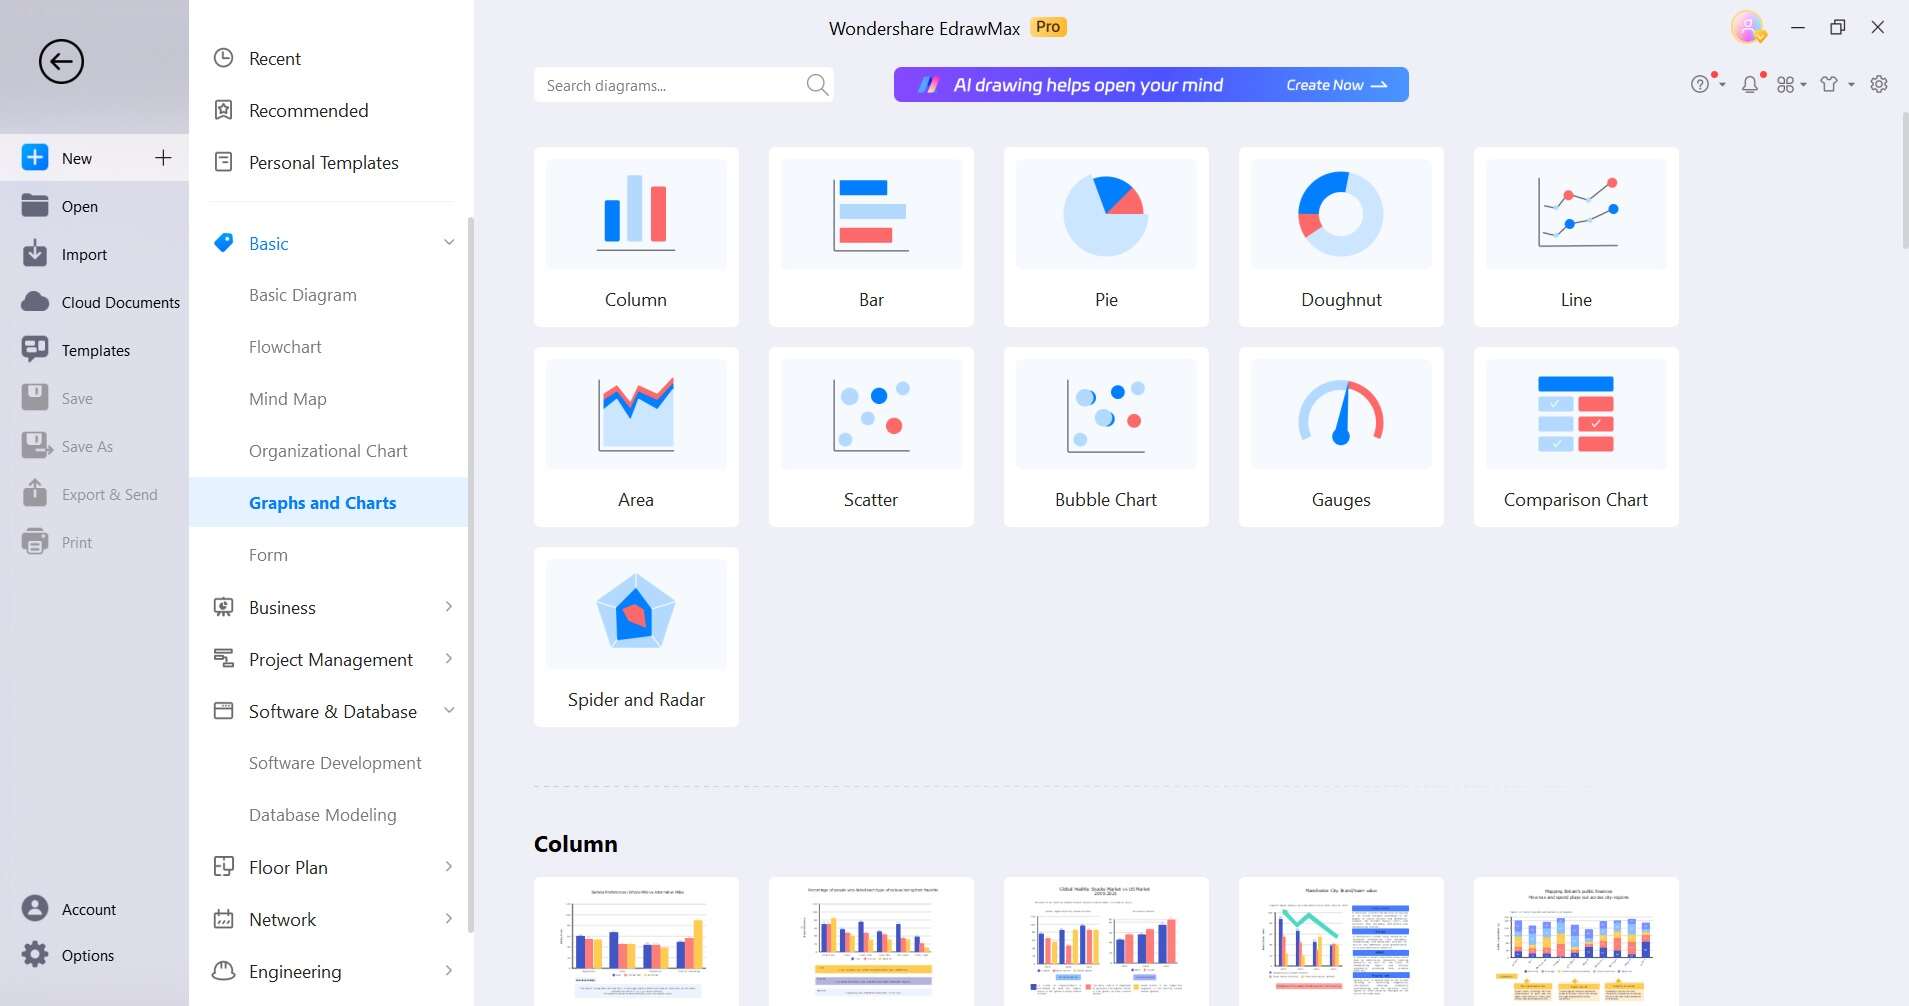 wondershare edrawmax graphs and charts section